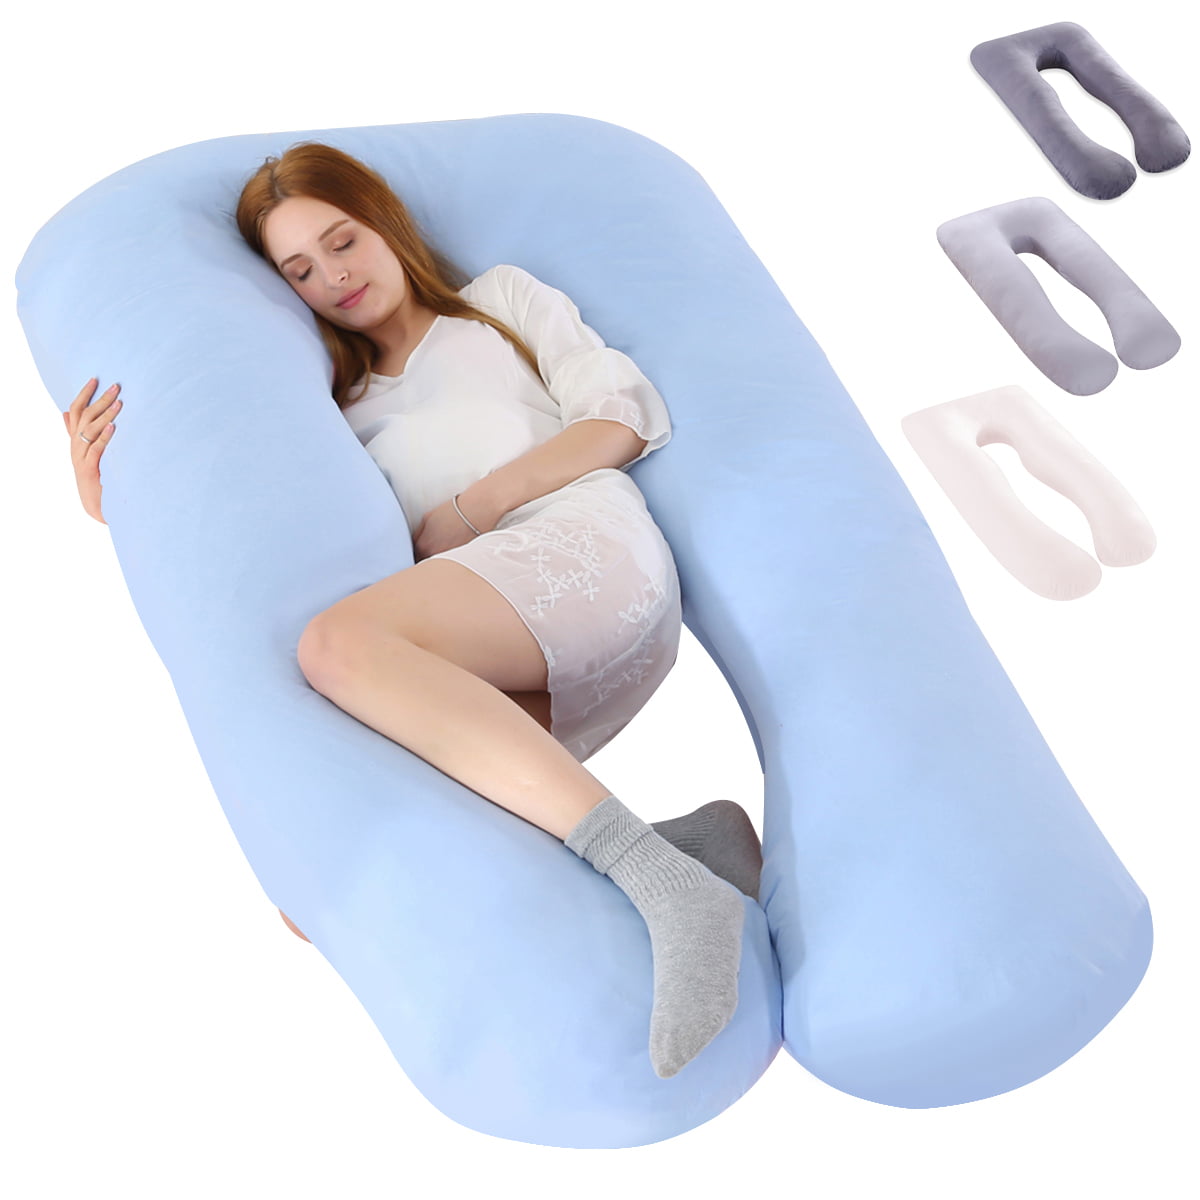 Doze Comfort Cozy Full Body Pregnancy Large U-Shaped Hug Pillow Cover Case Only